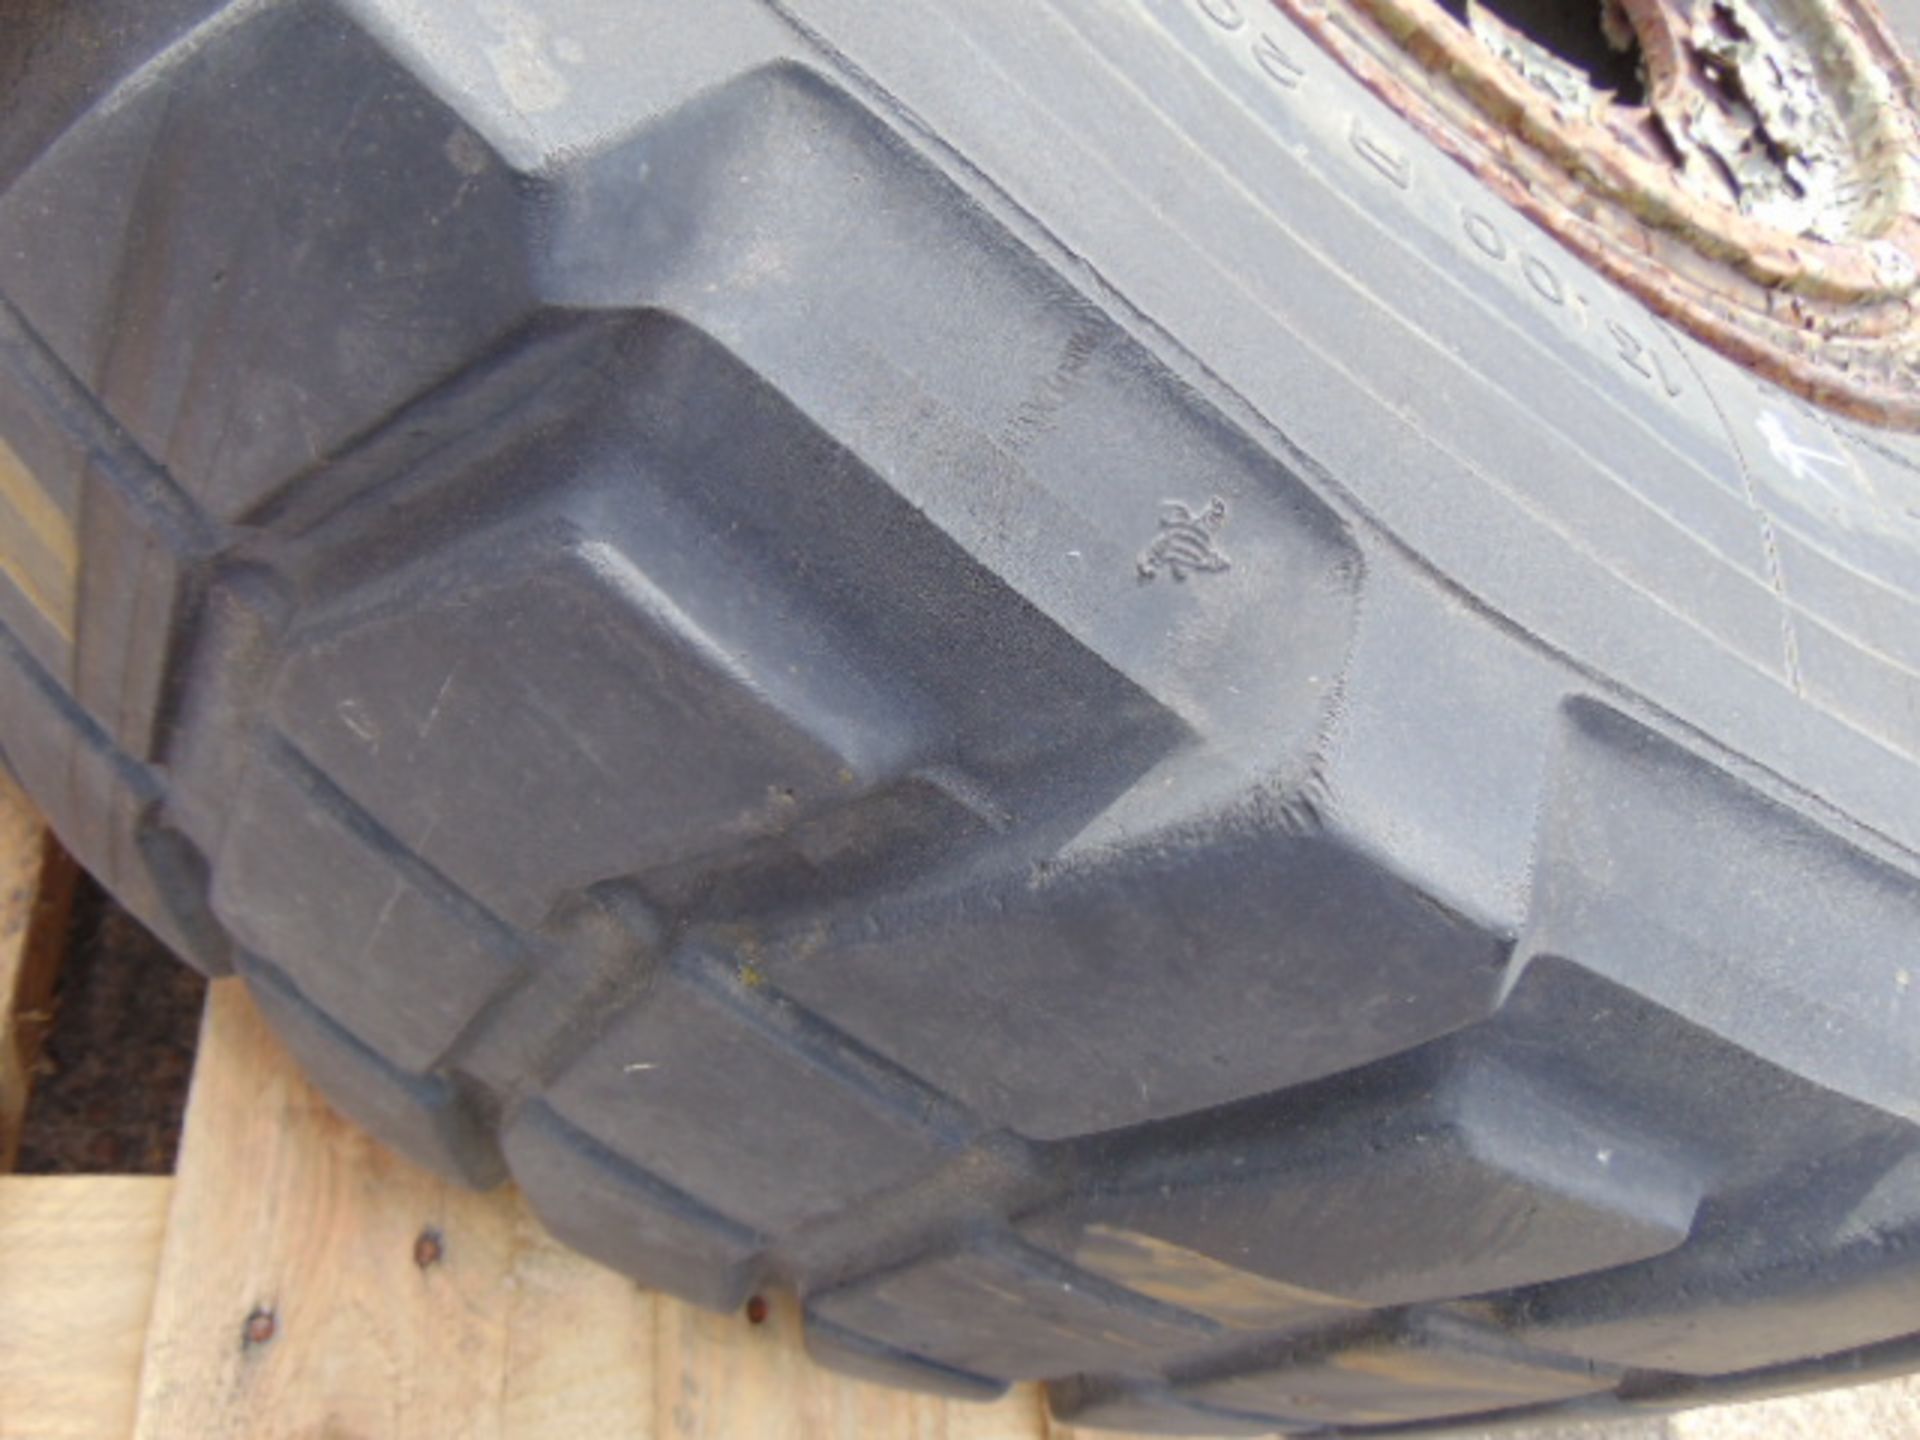 1 x Michelin 13.00 R20 Pilote XL Tyre on 10 stud Rim - Image 3 of 5